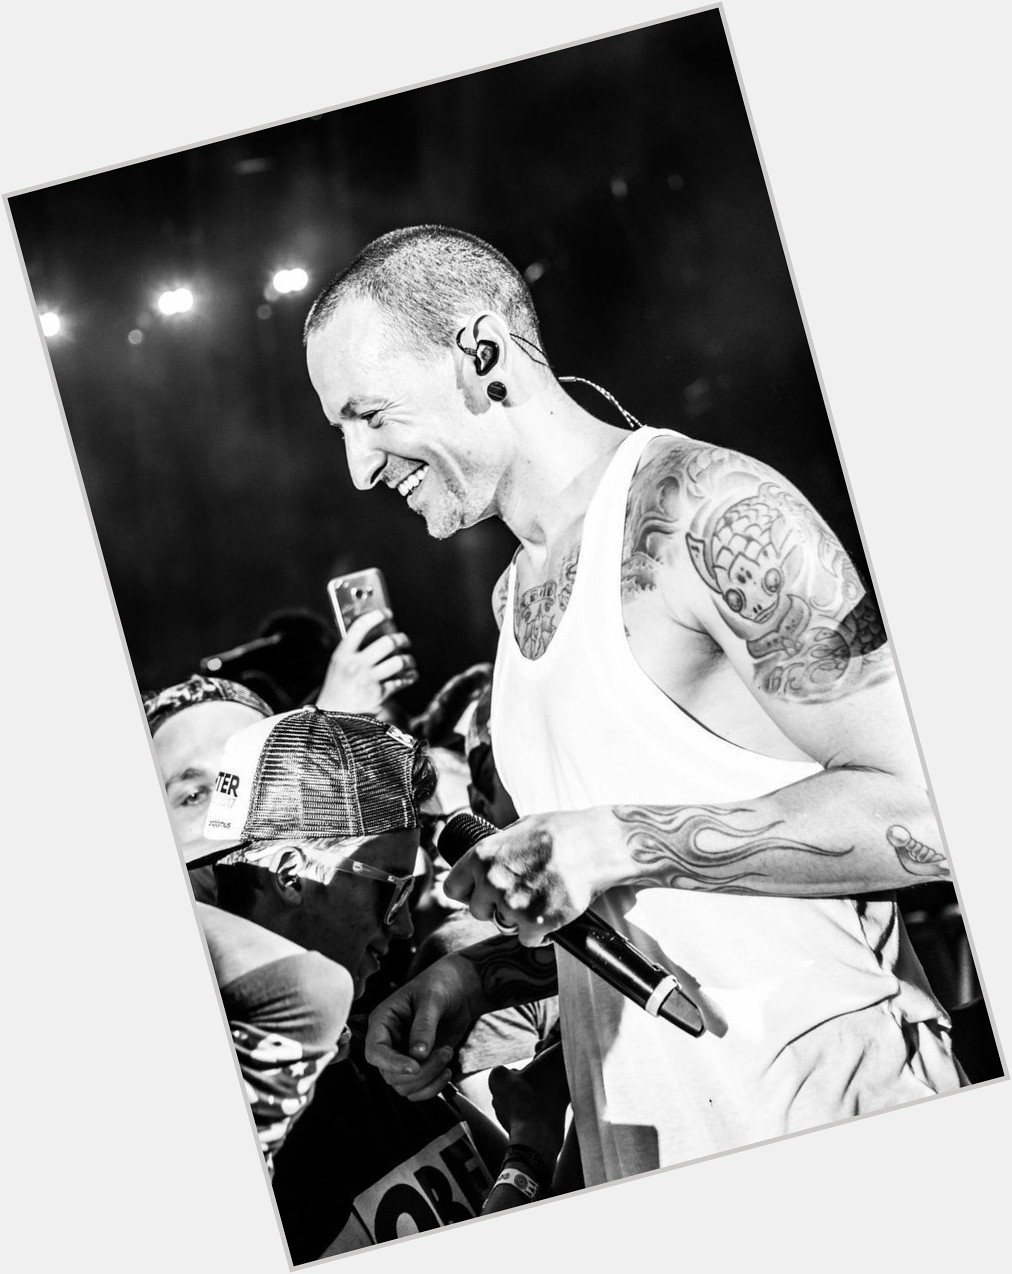 Happy birthday Chester Bennington,
you are always a legend.

forever will be missed 